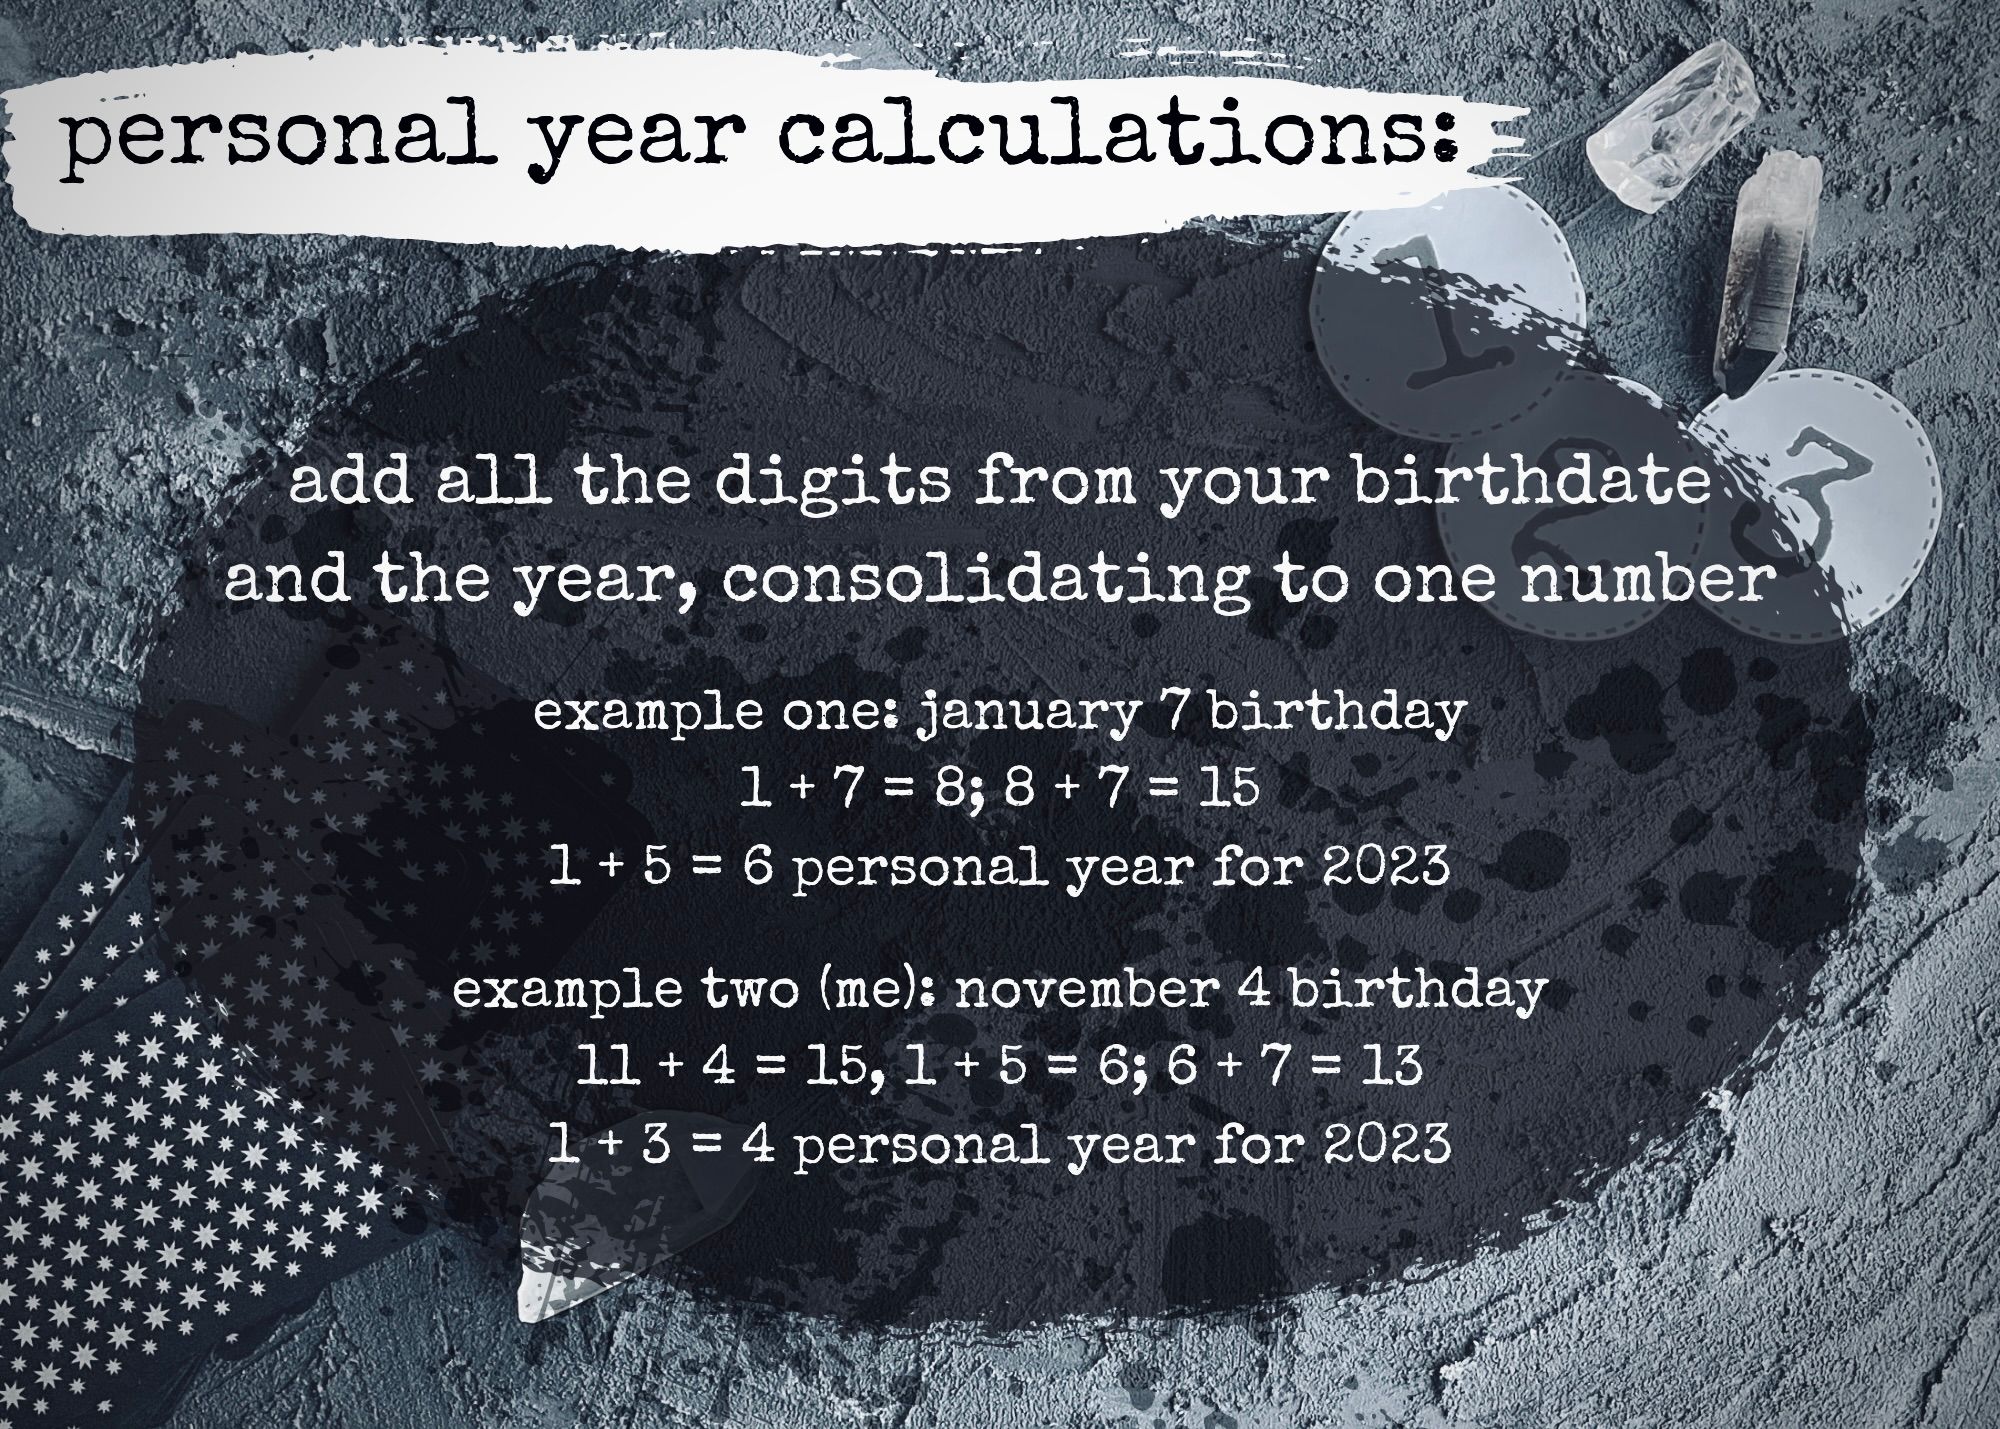 personal year calculations: add all the digits from your birthdate and the year, consolidating to one number. example one: january 7 birthday. example one: january 7 birthday 1 + 7 = 8; 8 + 7 = 15 1 + 5 = 6 personal year for 2023. example two (me): november 4 birthday 11 + 4 = 15, 1 + 5 = 6; 6 + 7 = 13 1 + 3 = 4 personal year for 2023.